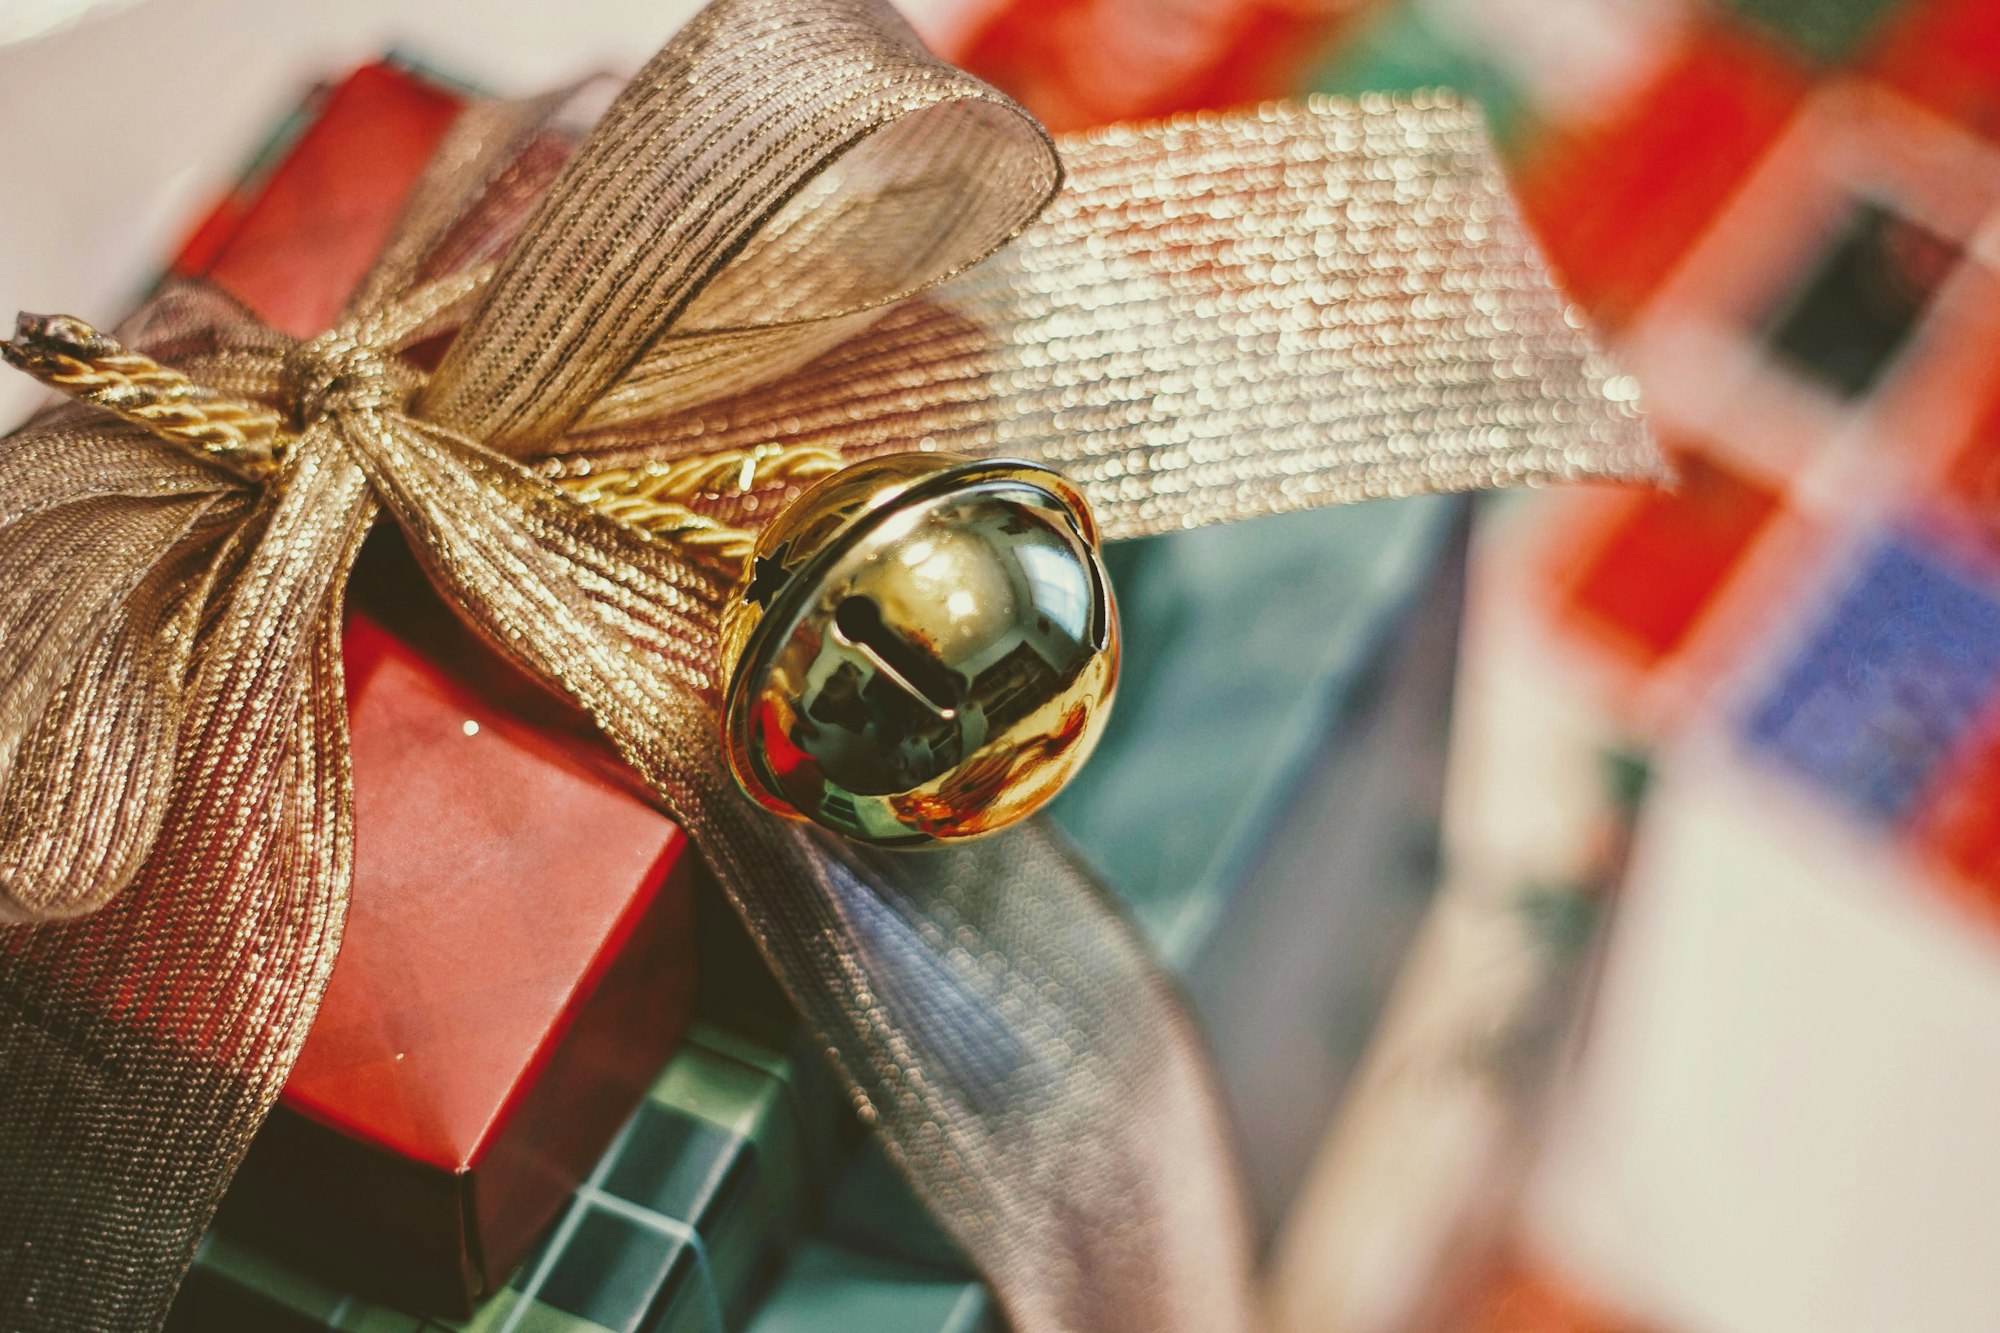 Your guide to recycling over the holidays